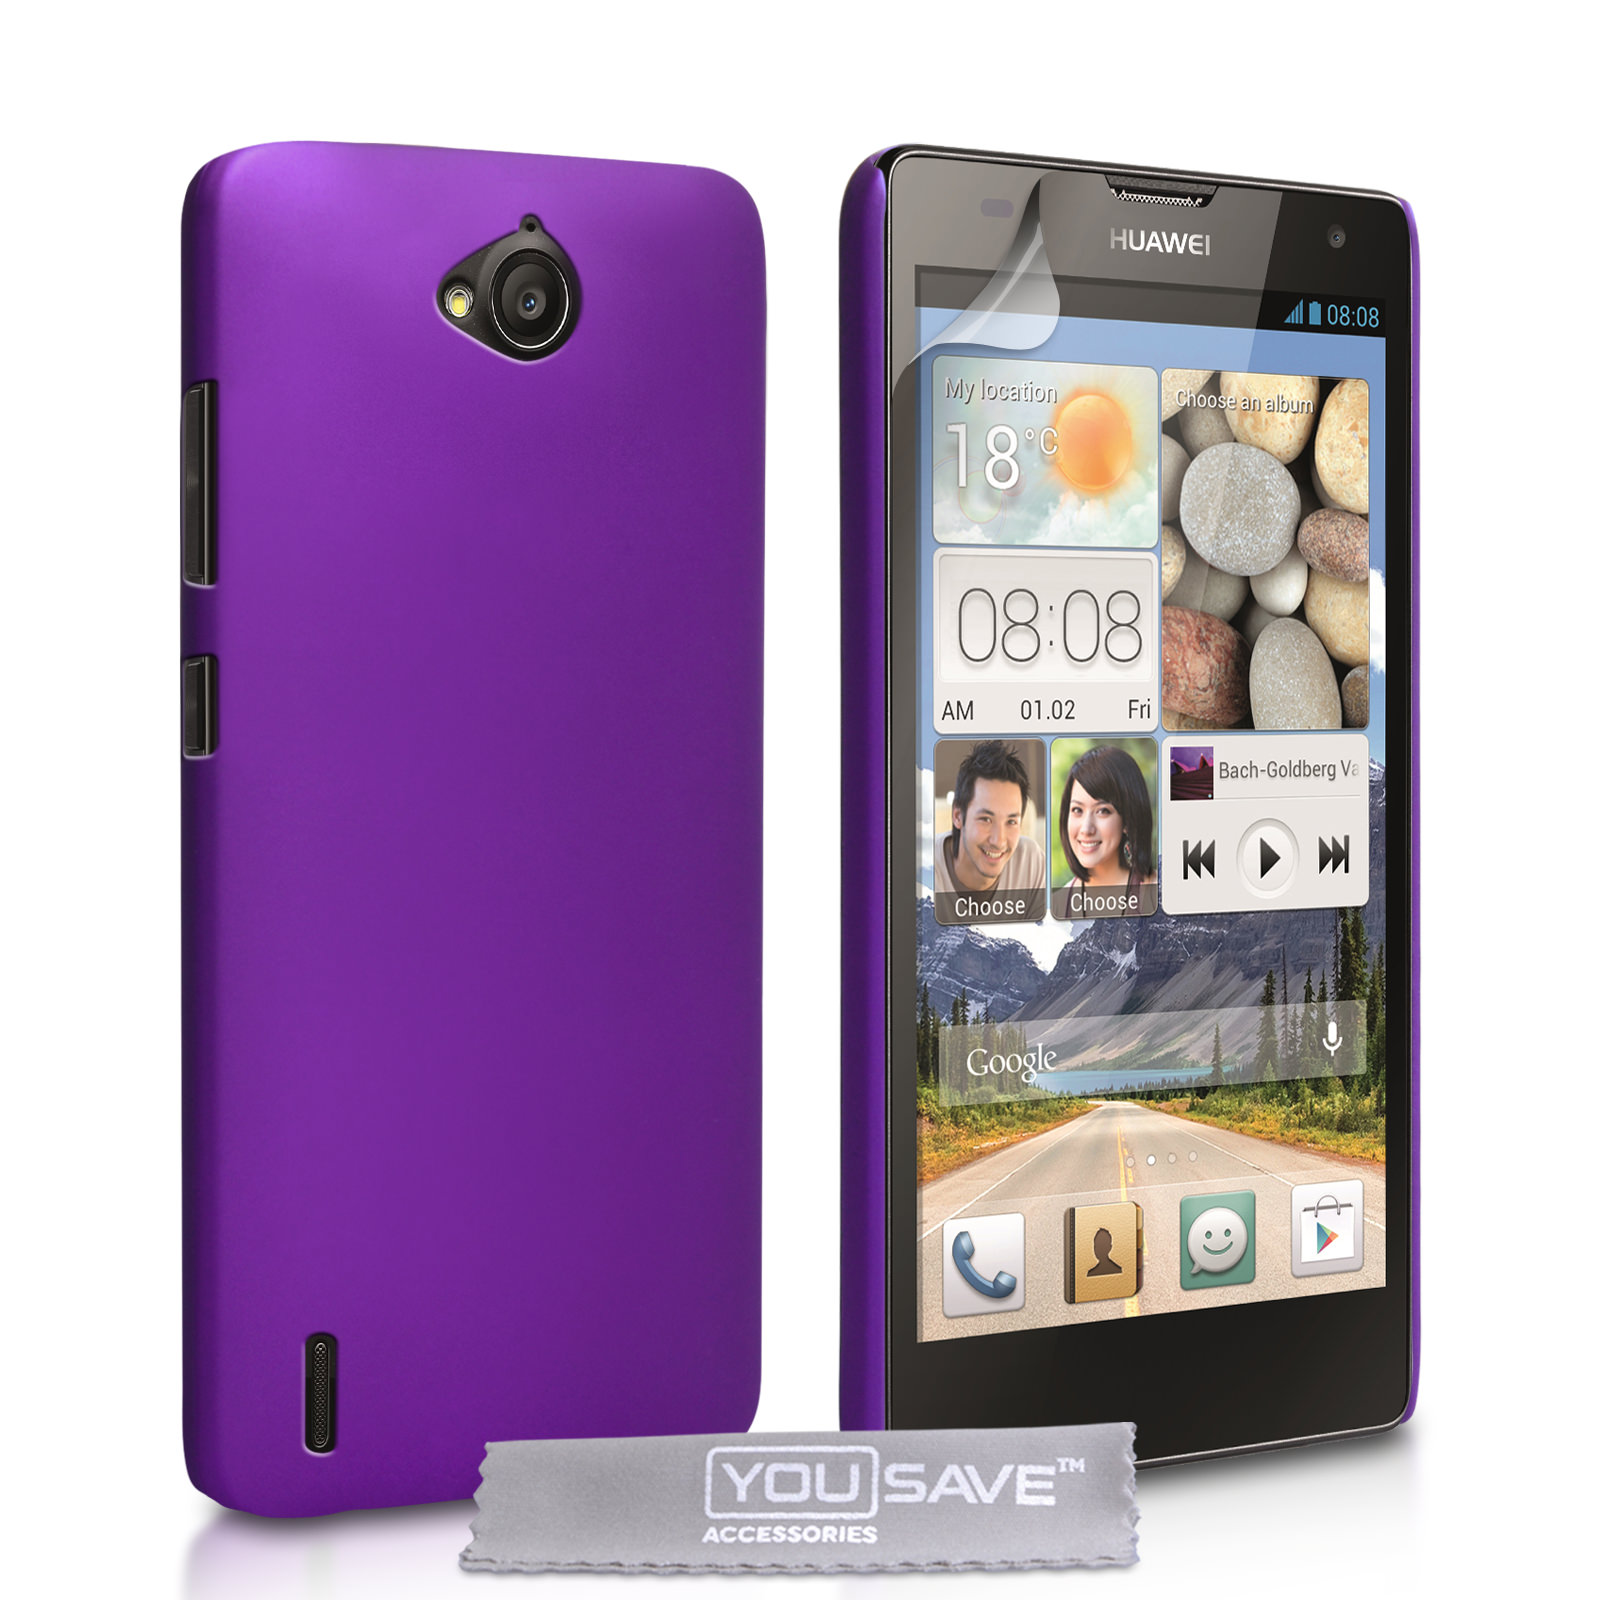 YouSave Accessories Huawei Ascend G740 Hard Hybrid Case - Purple